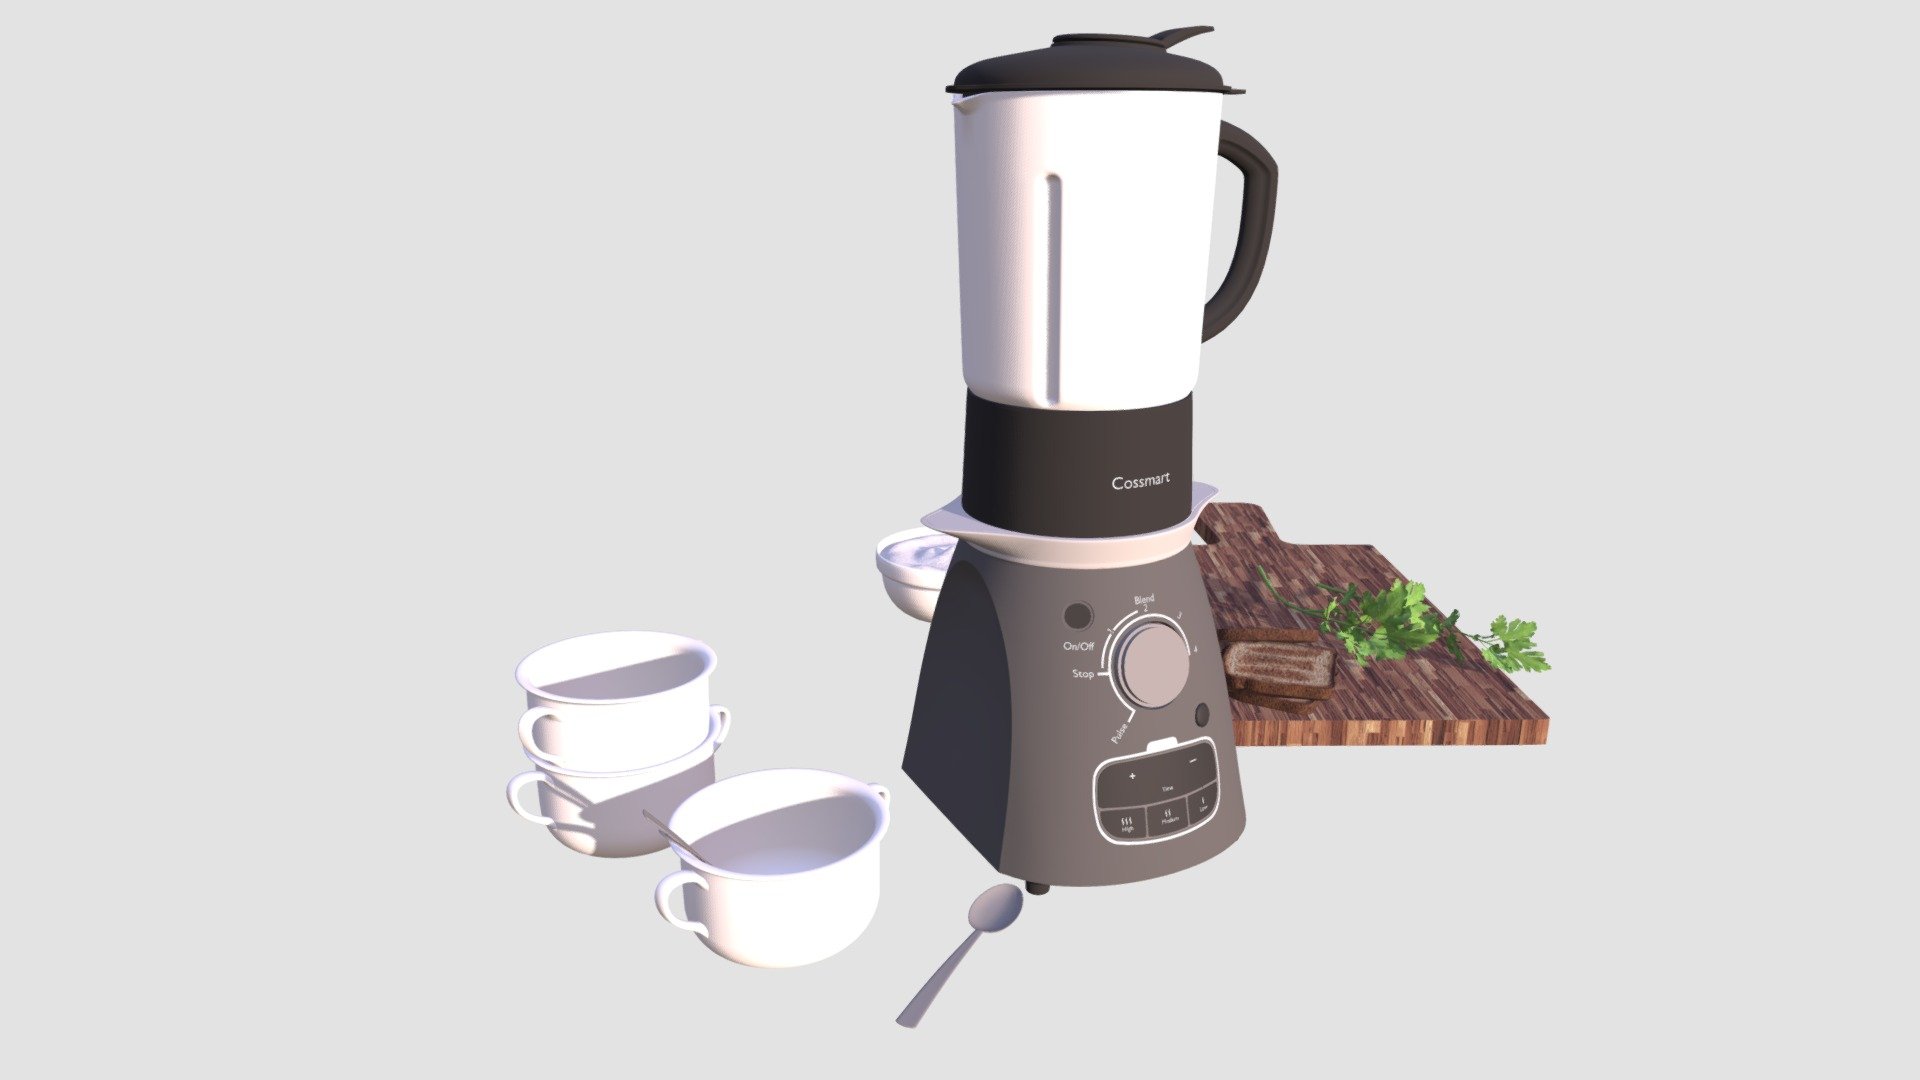 Highly detailed 3d model of blender with all textures, shaders and materials. It is ready to use, just put it into your scene 3d model